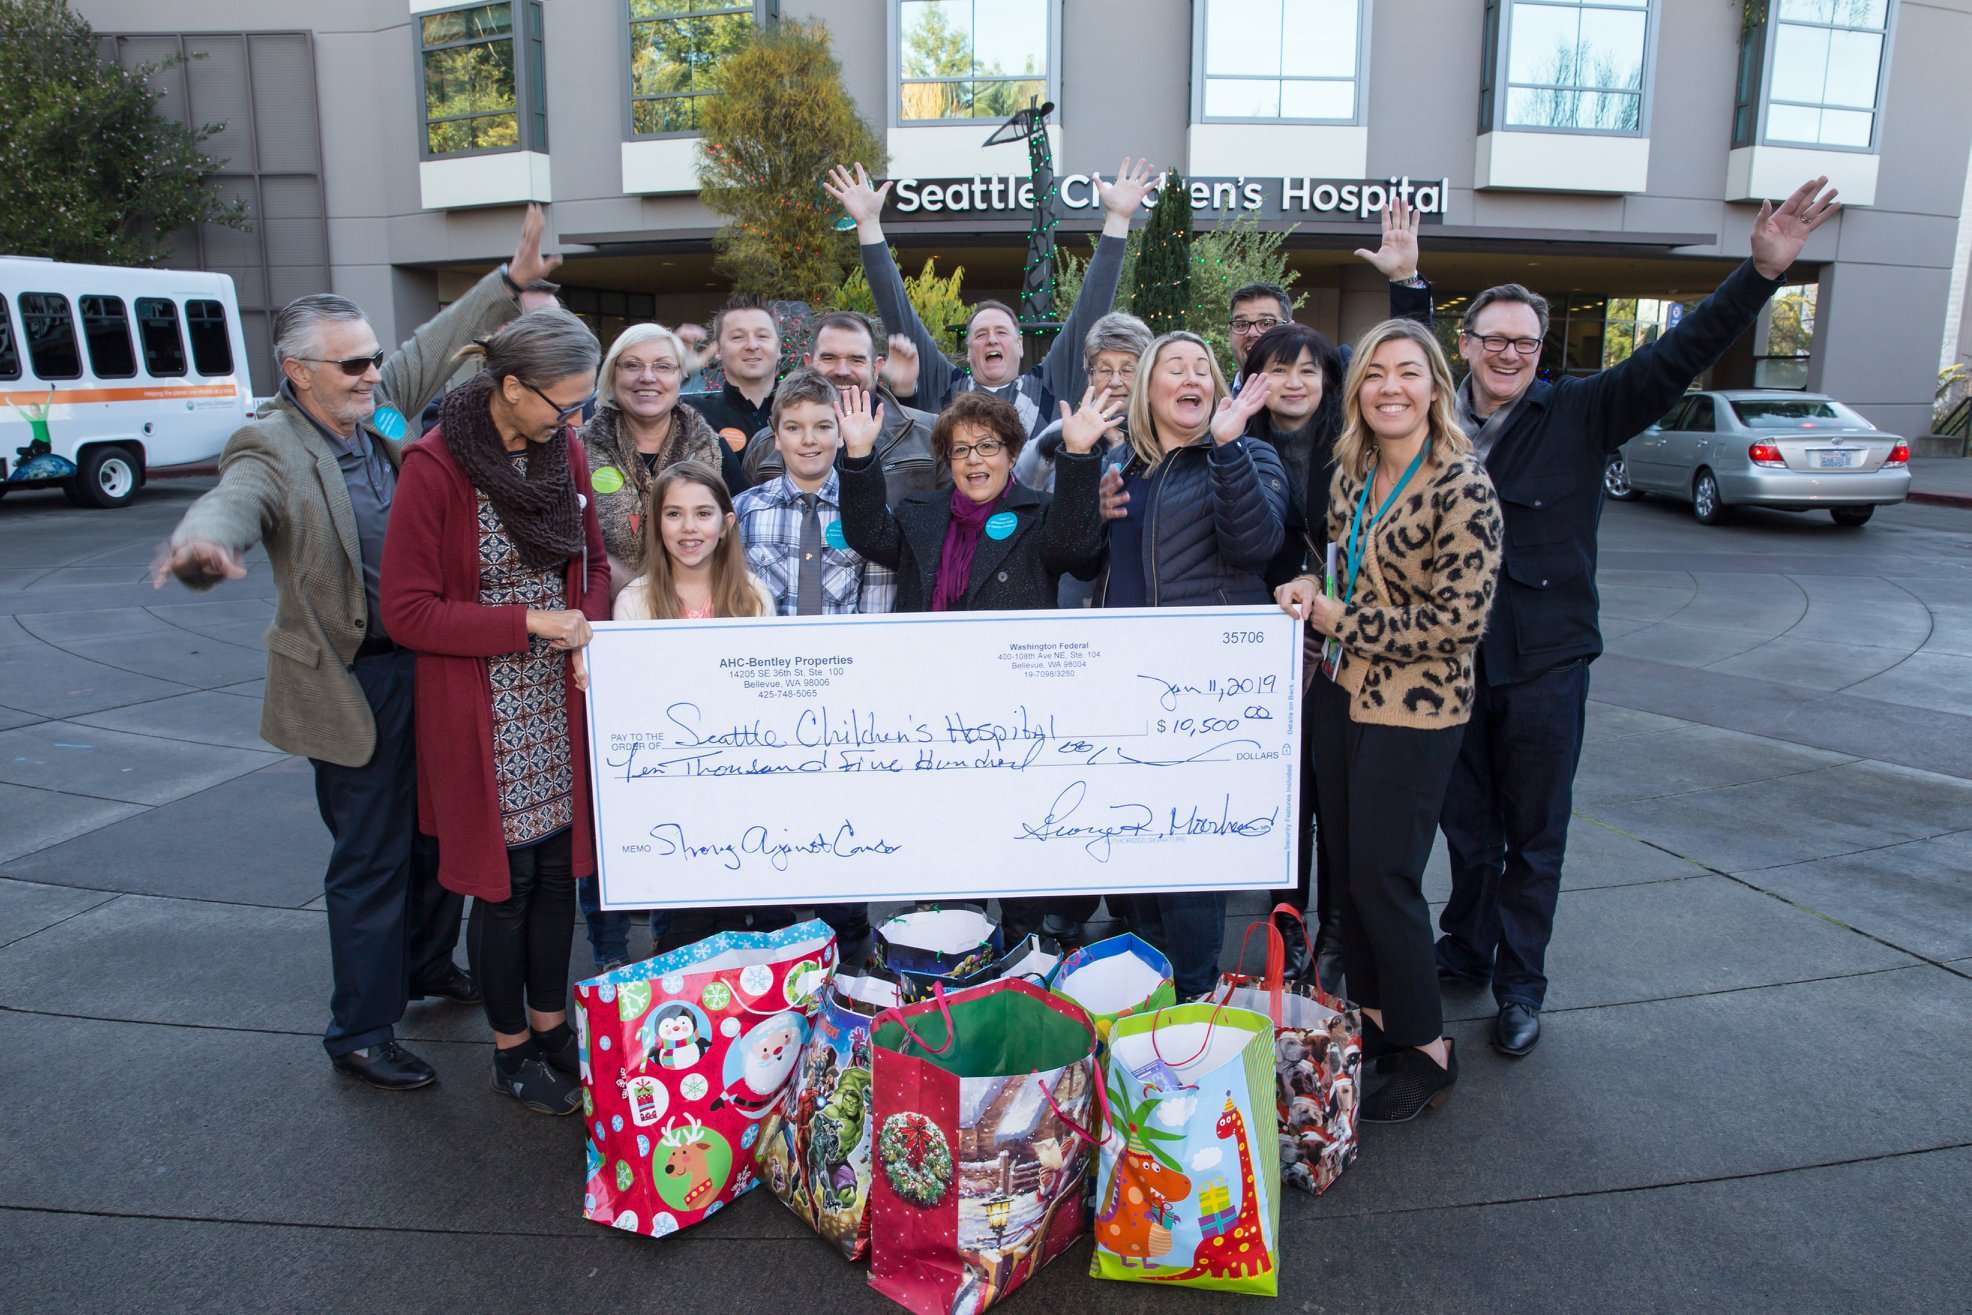 Children’s Hospital Cancer Research Donation